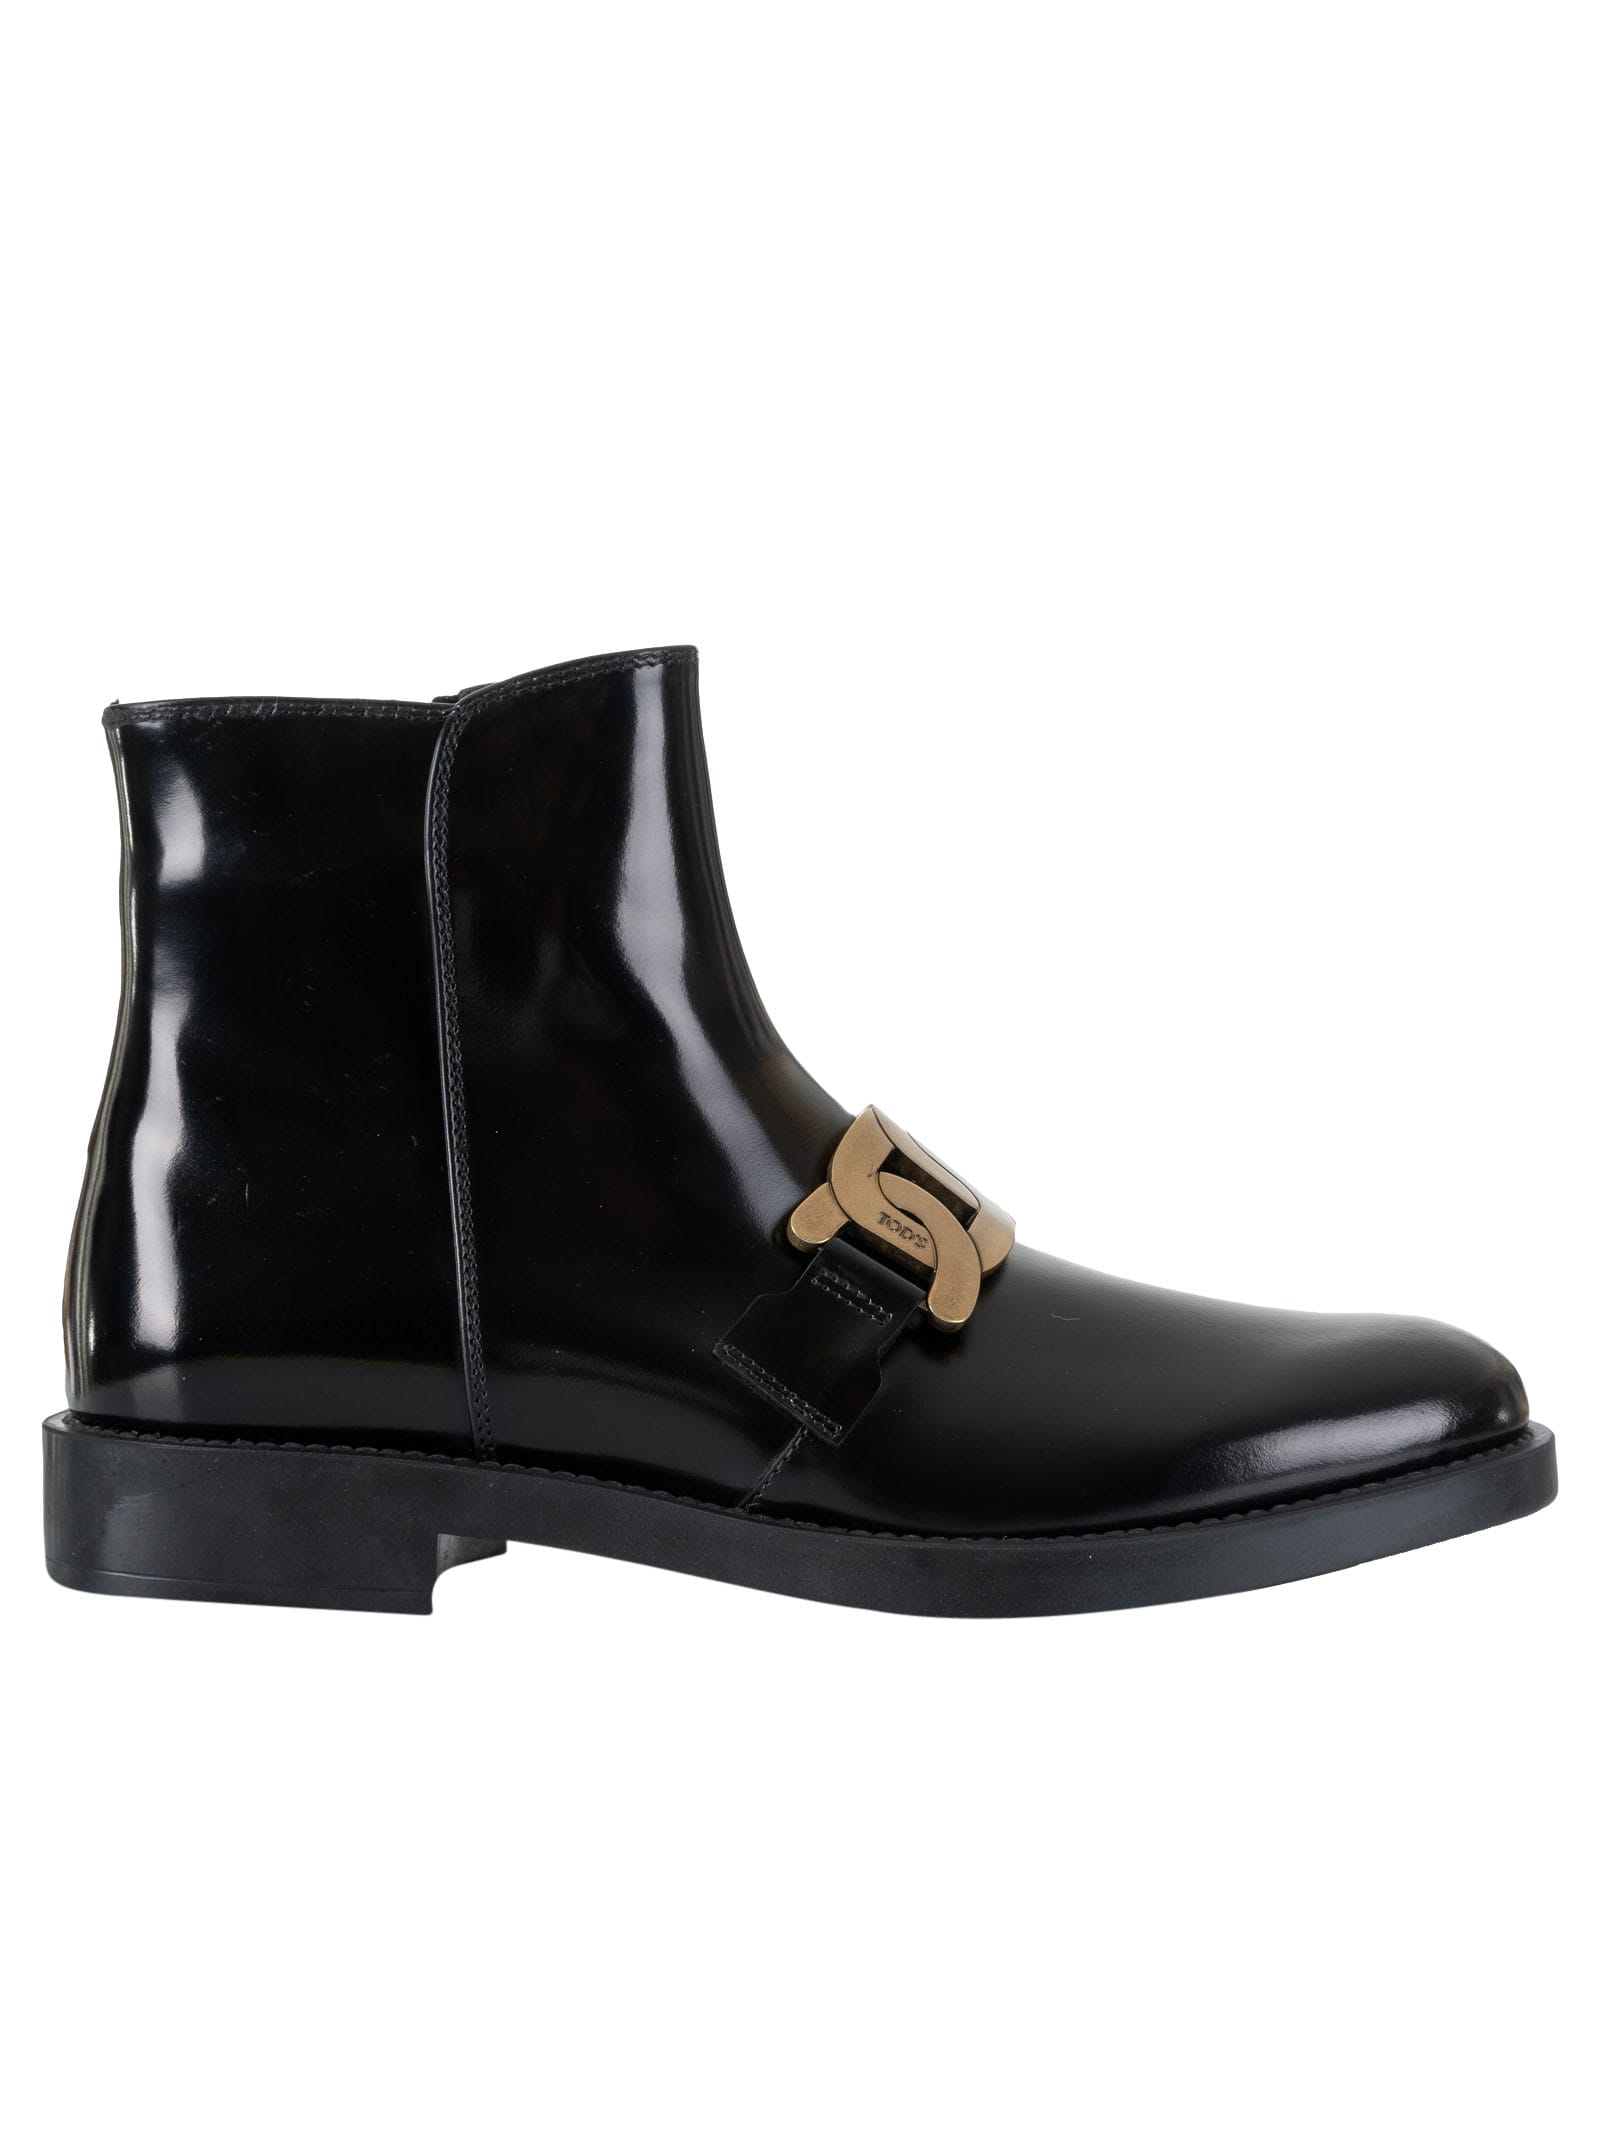 Tods Catena Boots